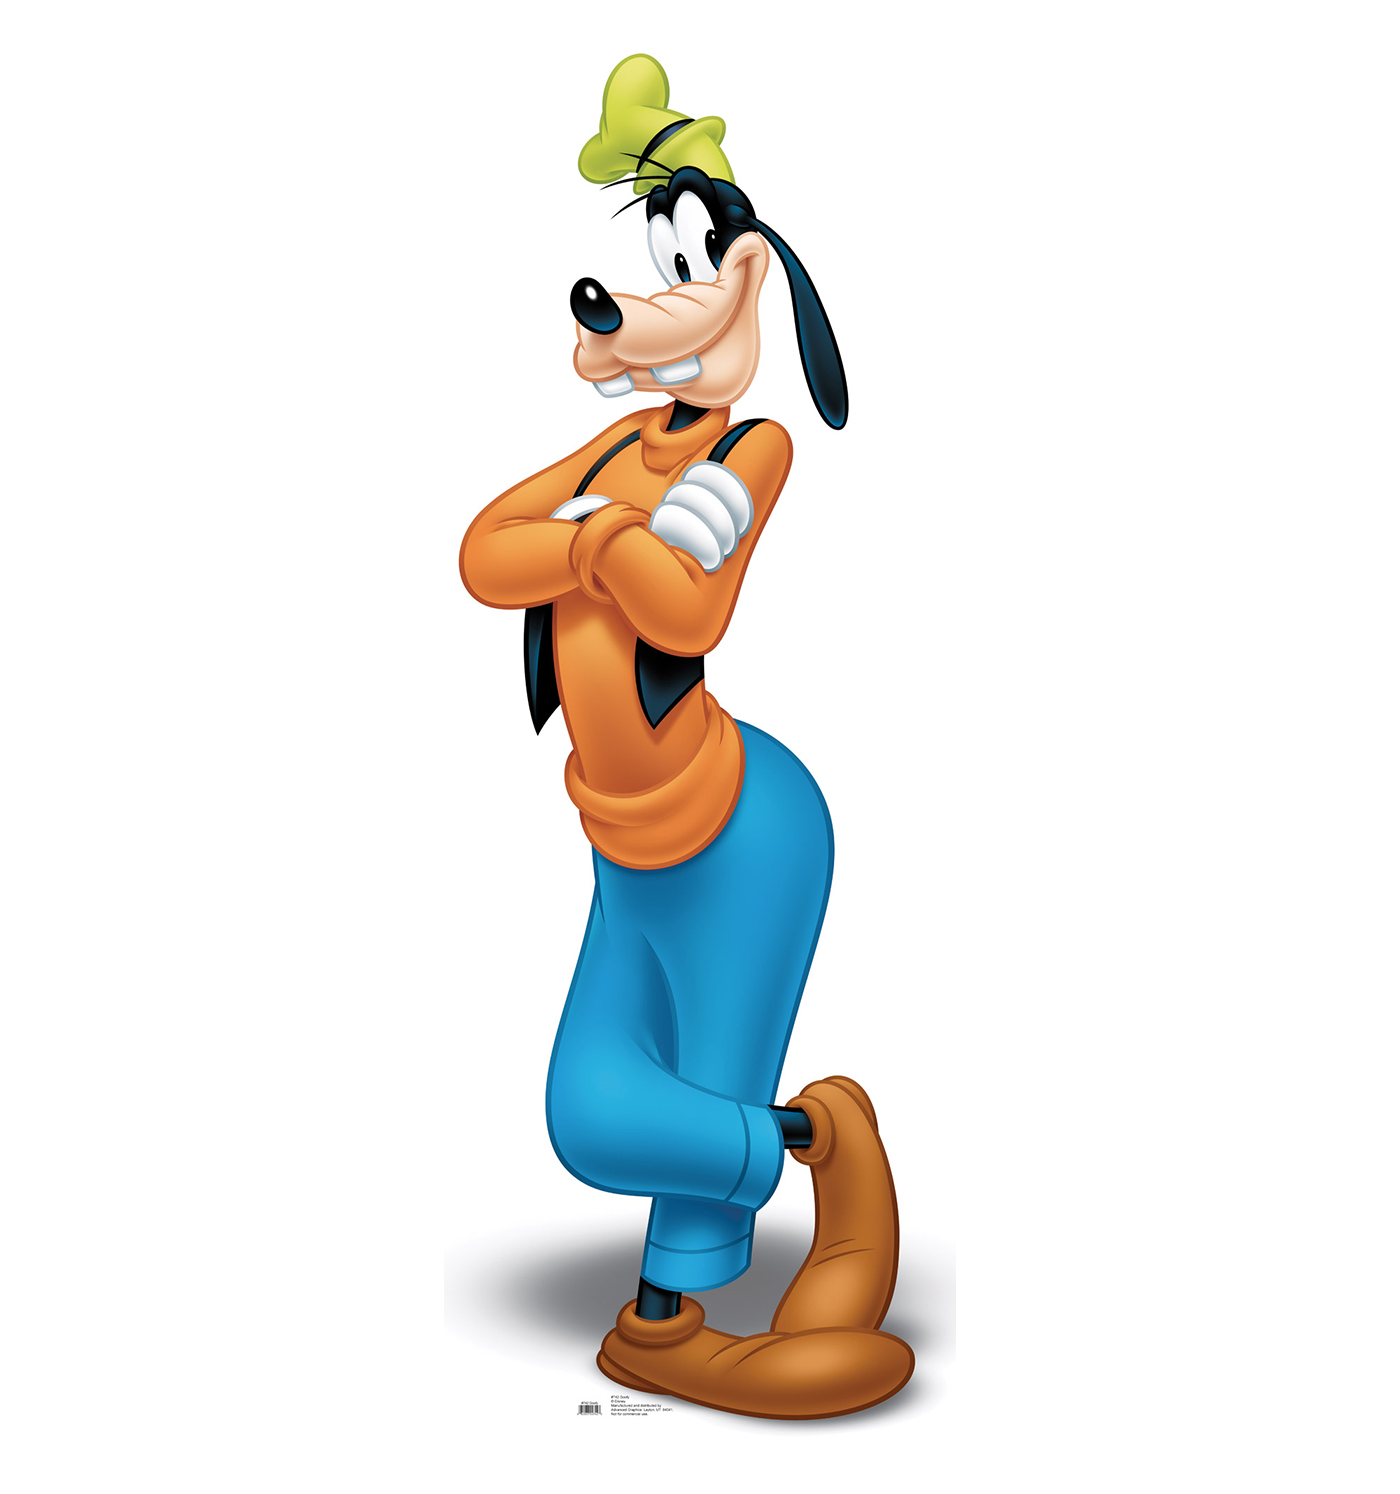 HQ Goofy Wallpapers | File 357.92Kb